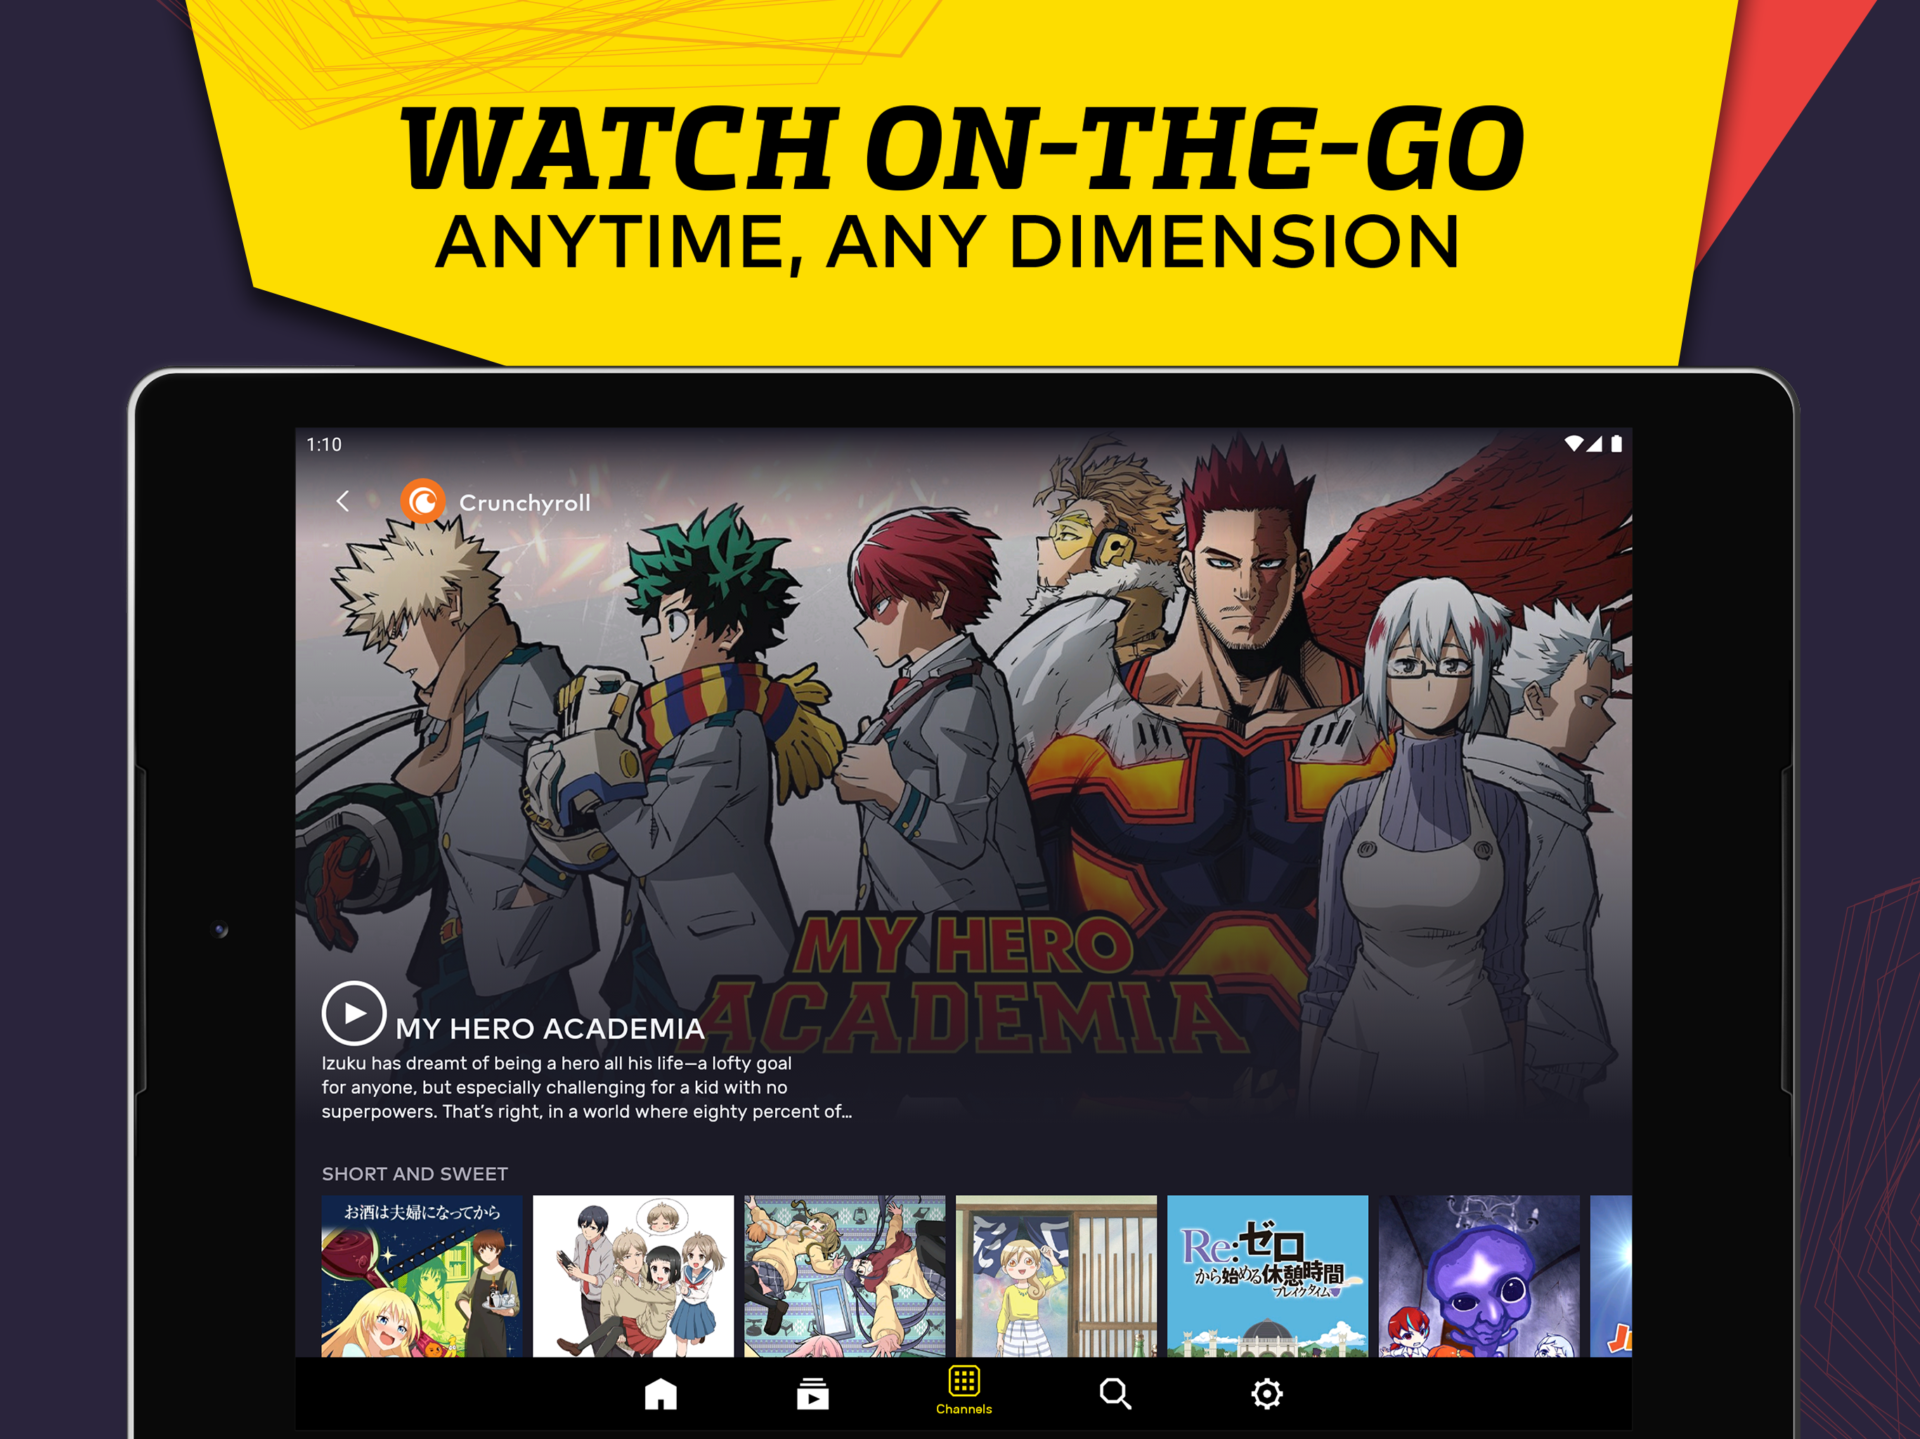 Sony's Crunchyroll Purchase Also Includes Ellation's VRV – The Streamable